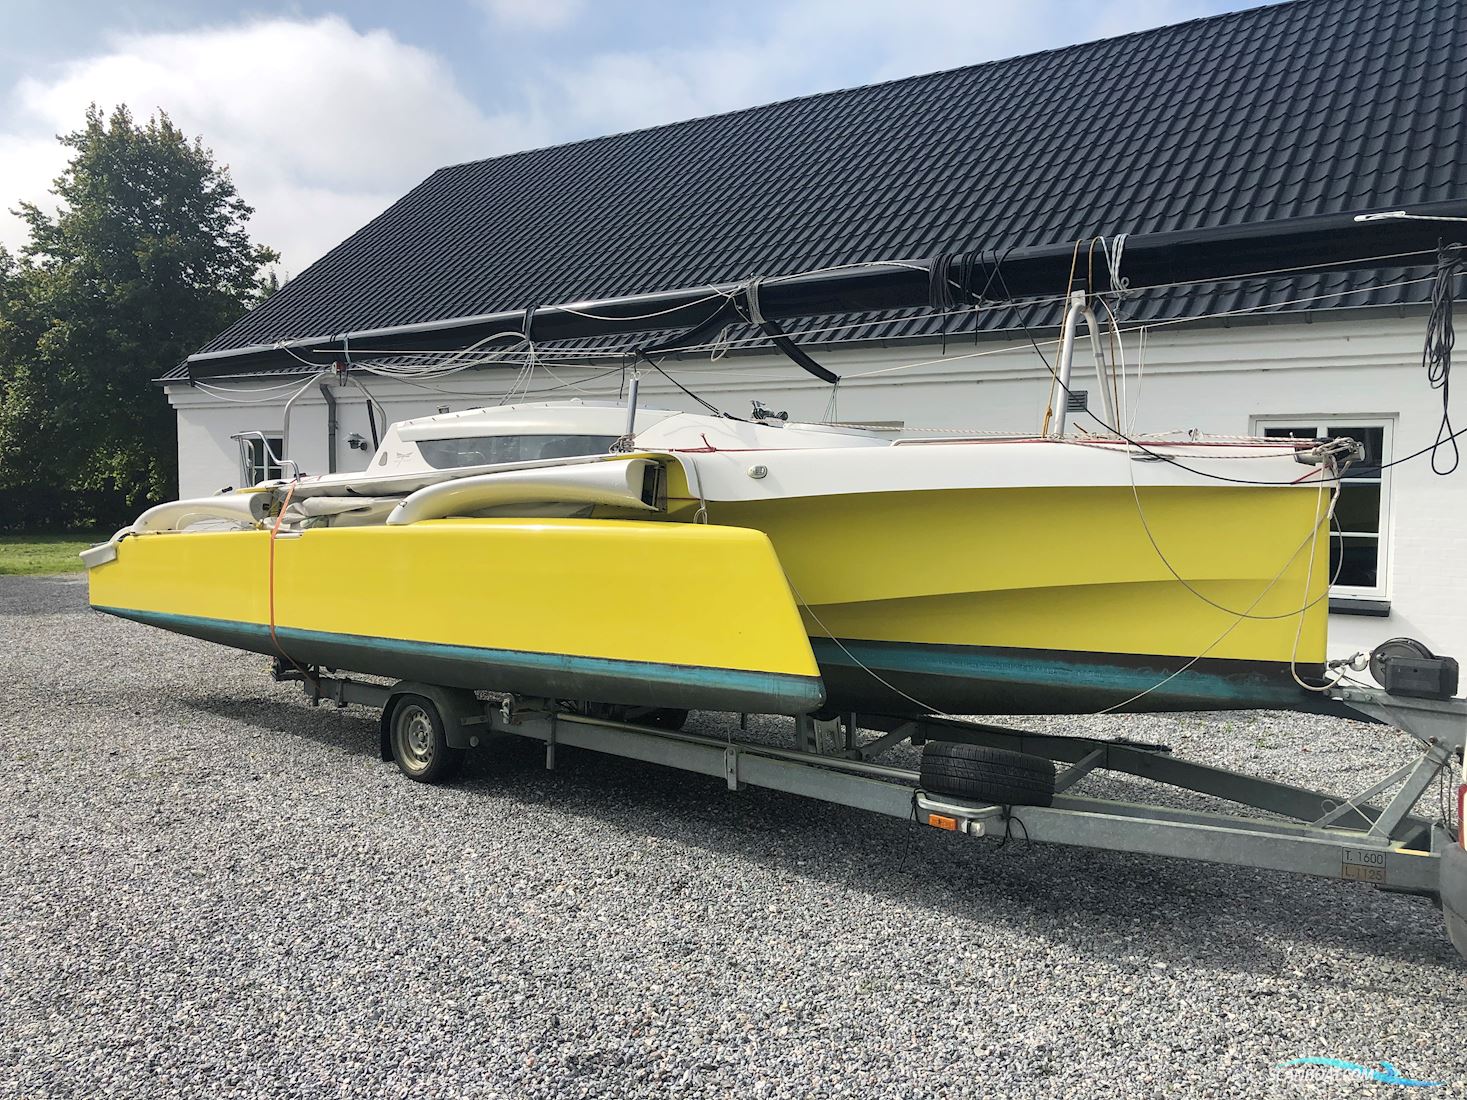 Dragonfly 25 Sport Multi hull boat 2015, with Tohatsu engine, Denmark